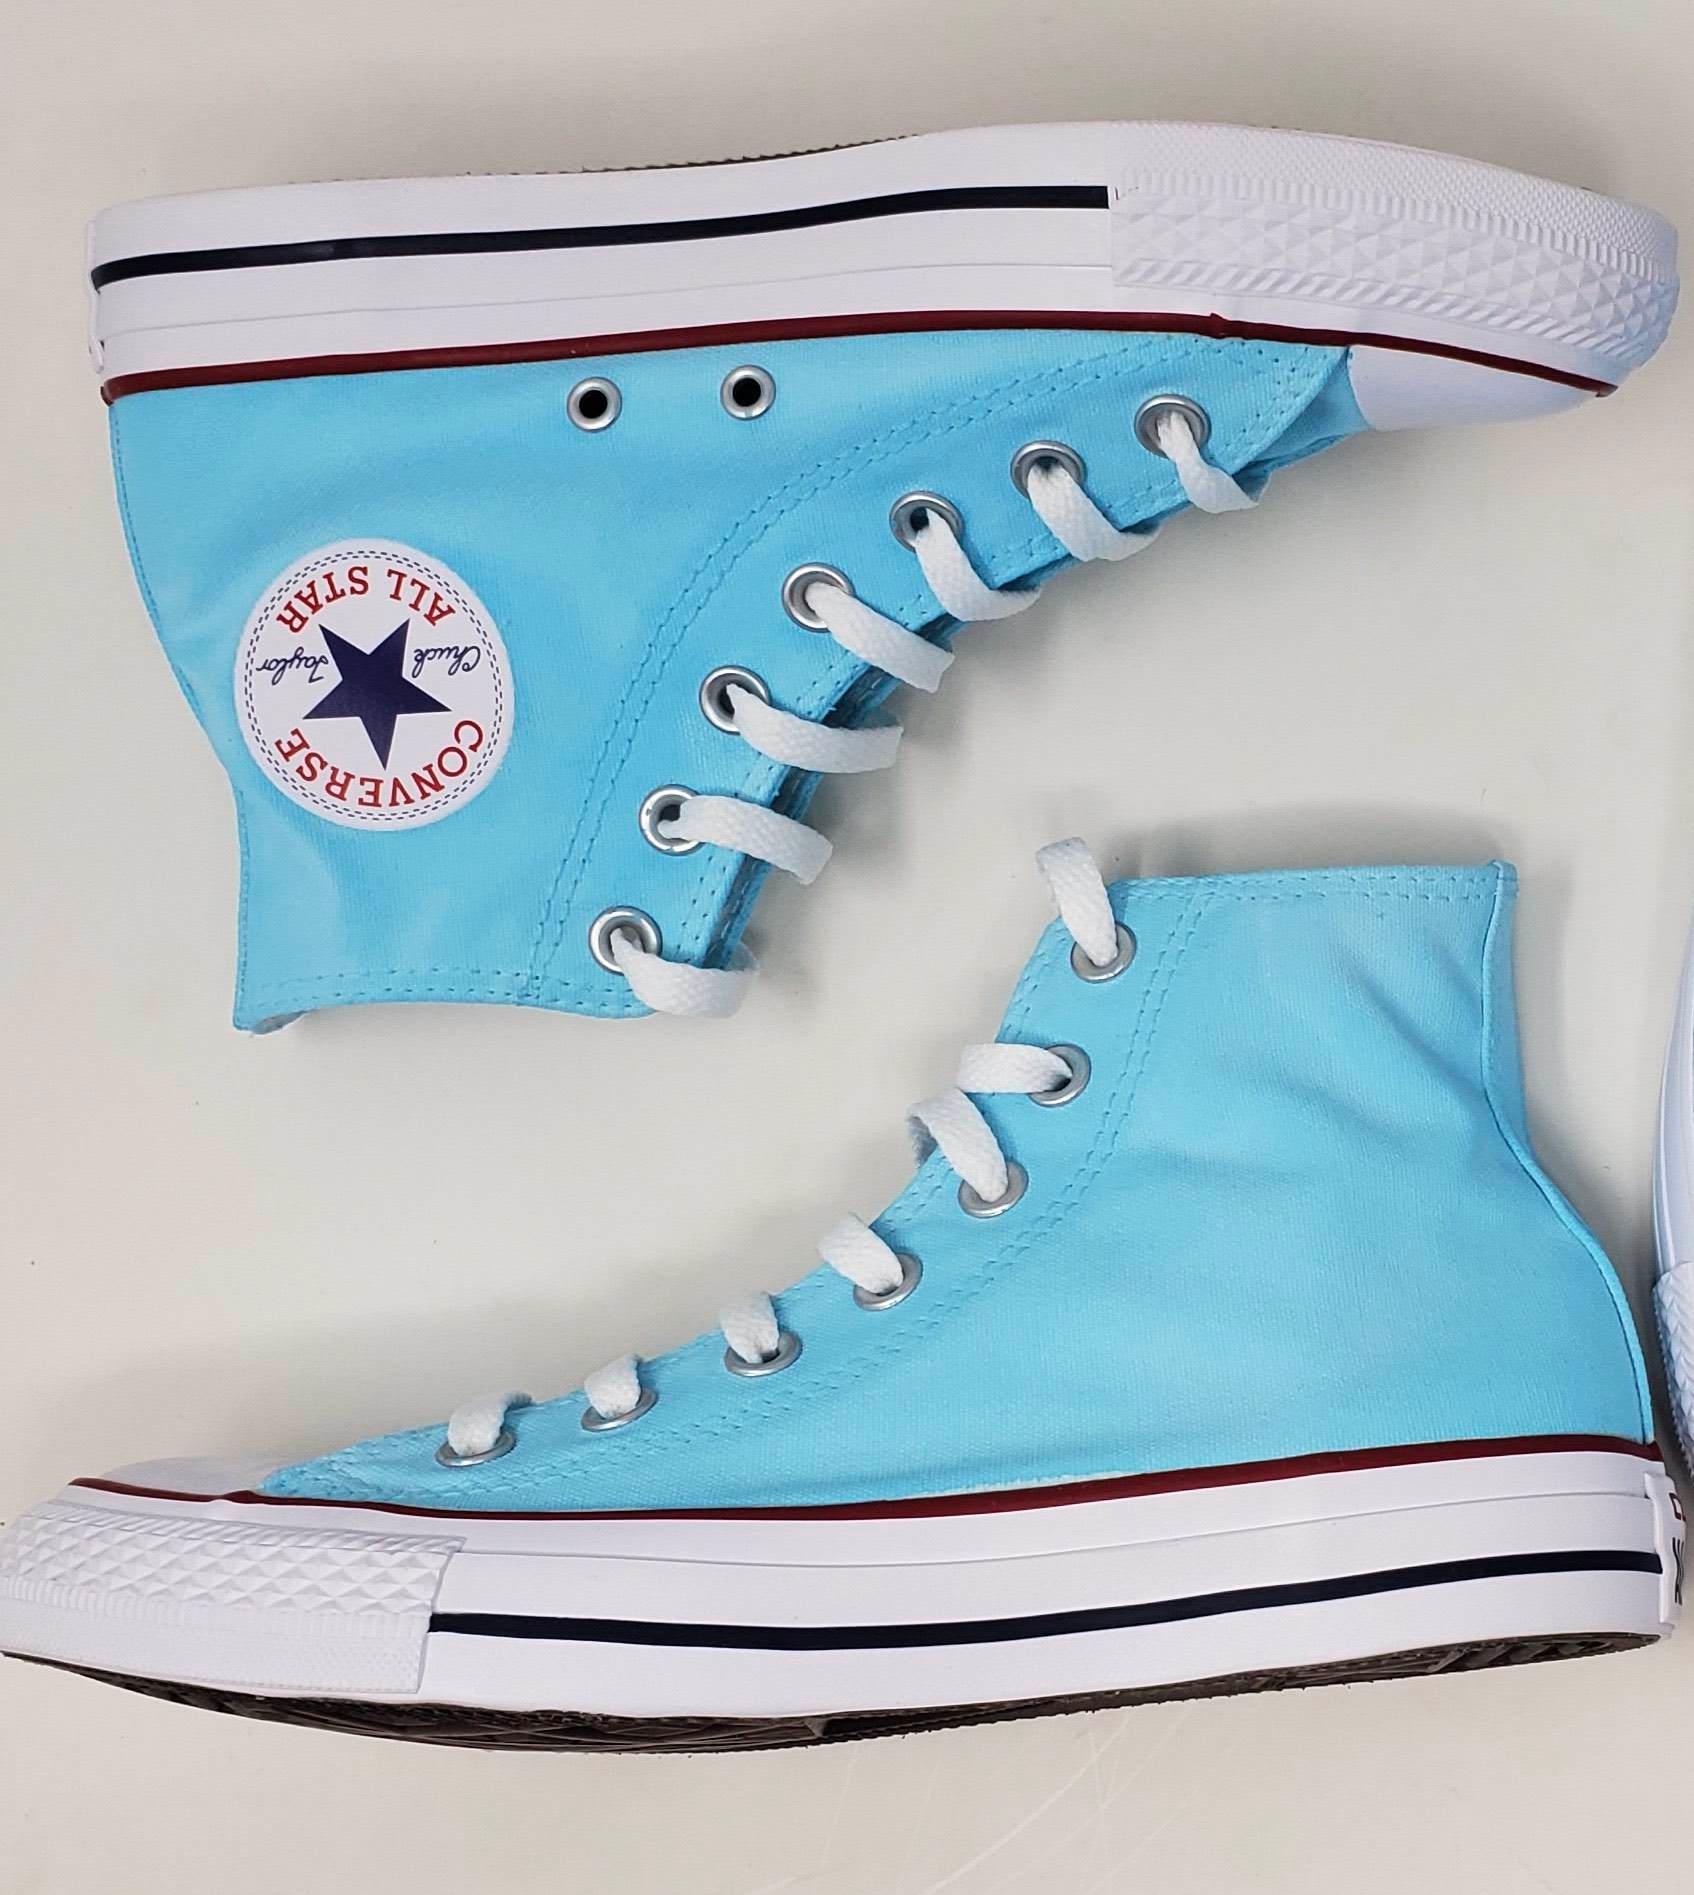 Sky Blue Shoes - ButterMakesMeHappy